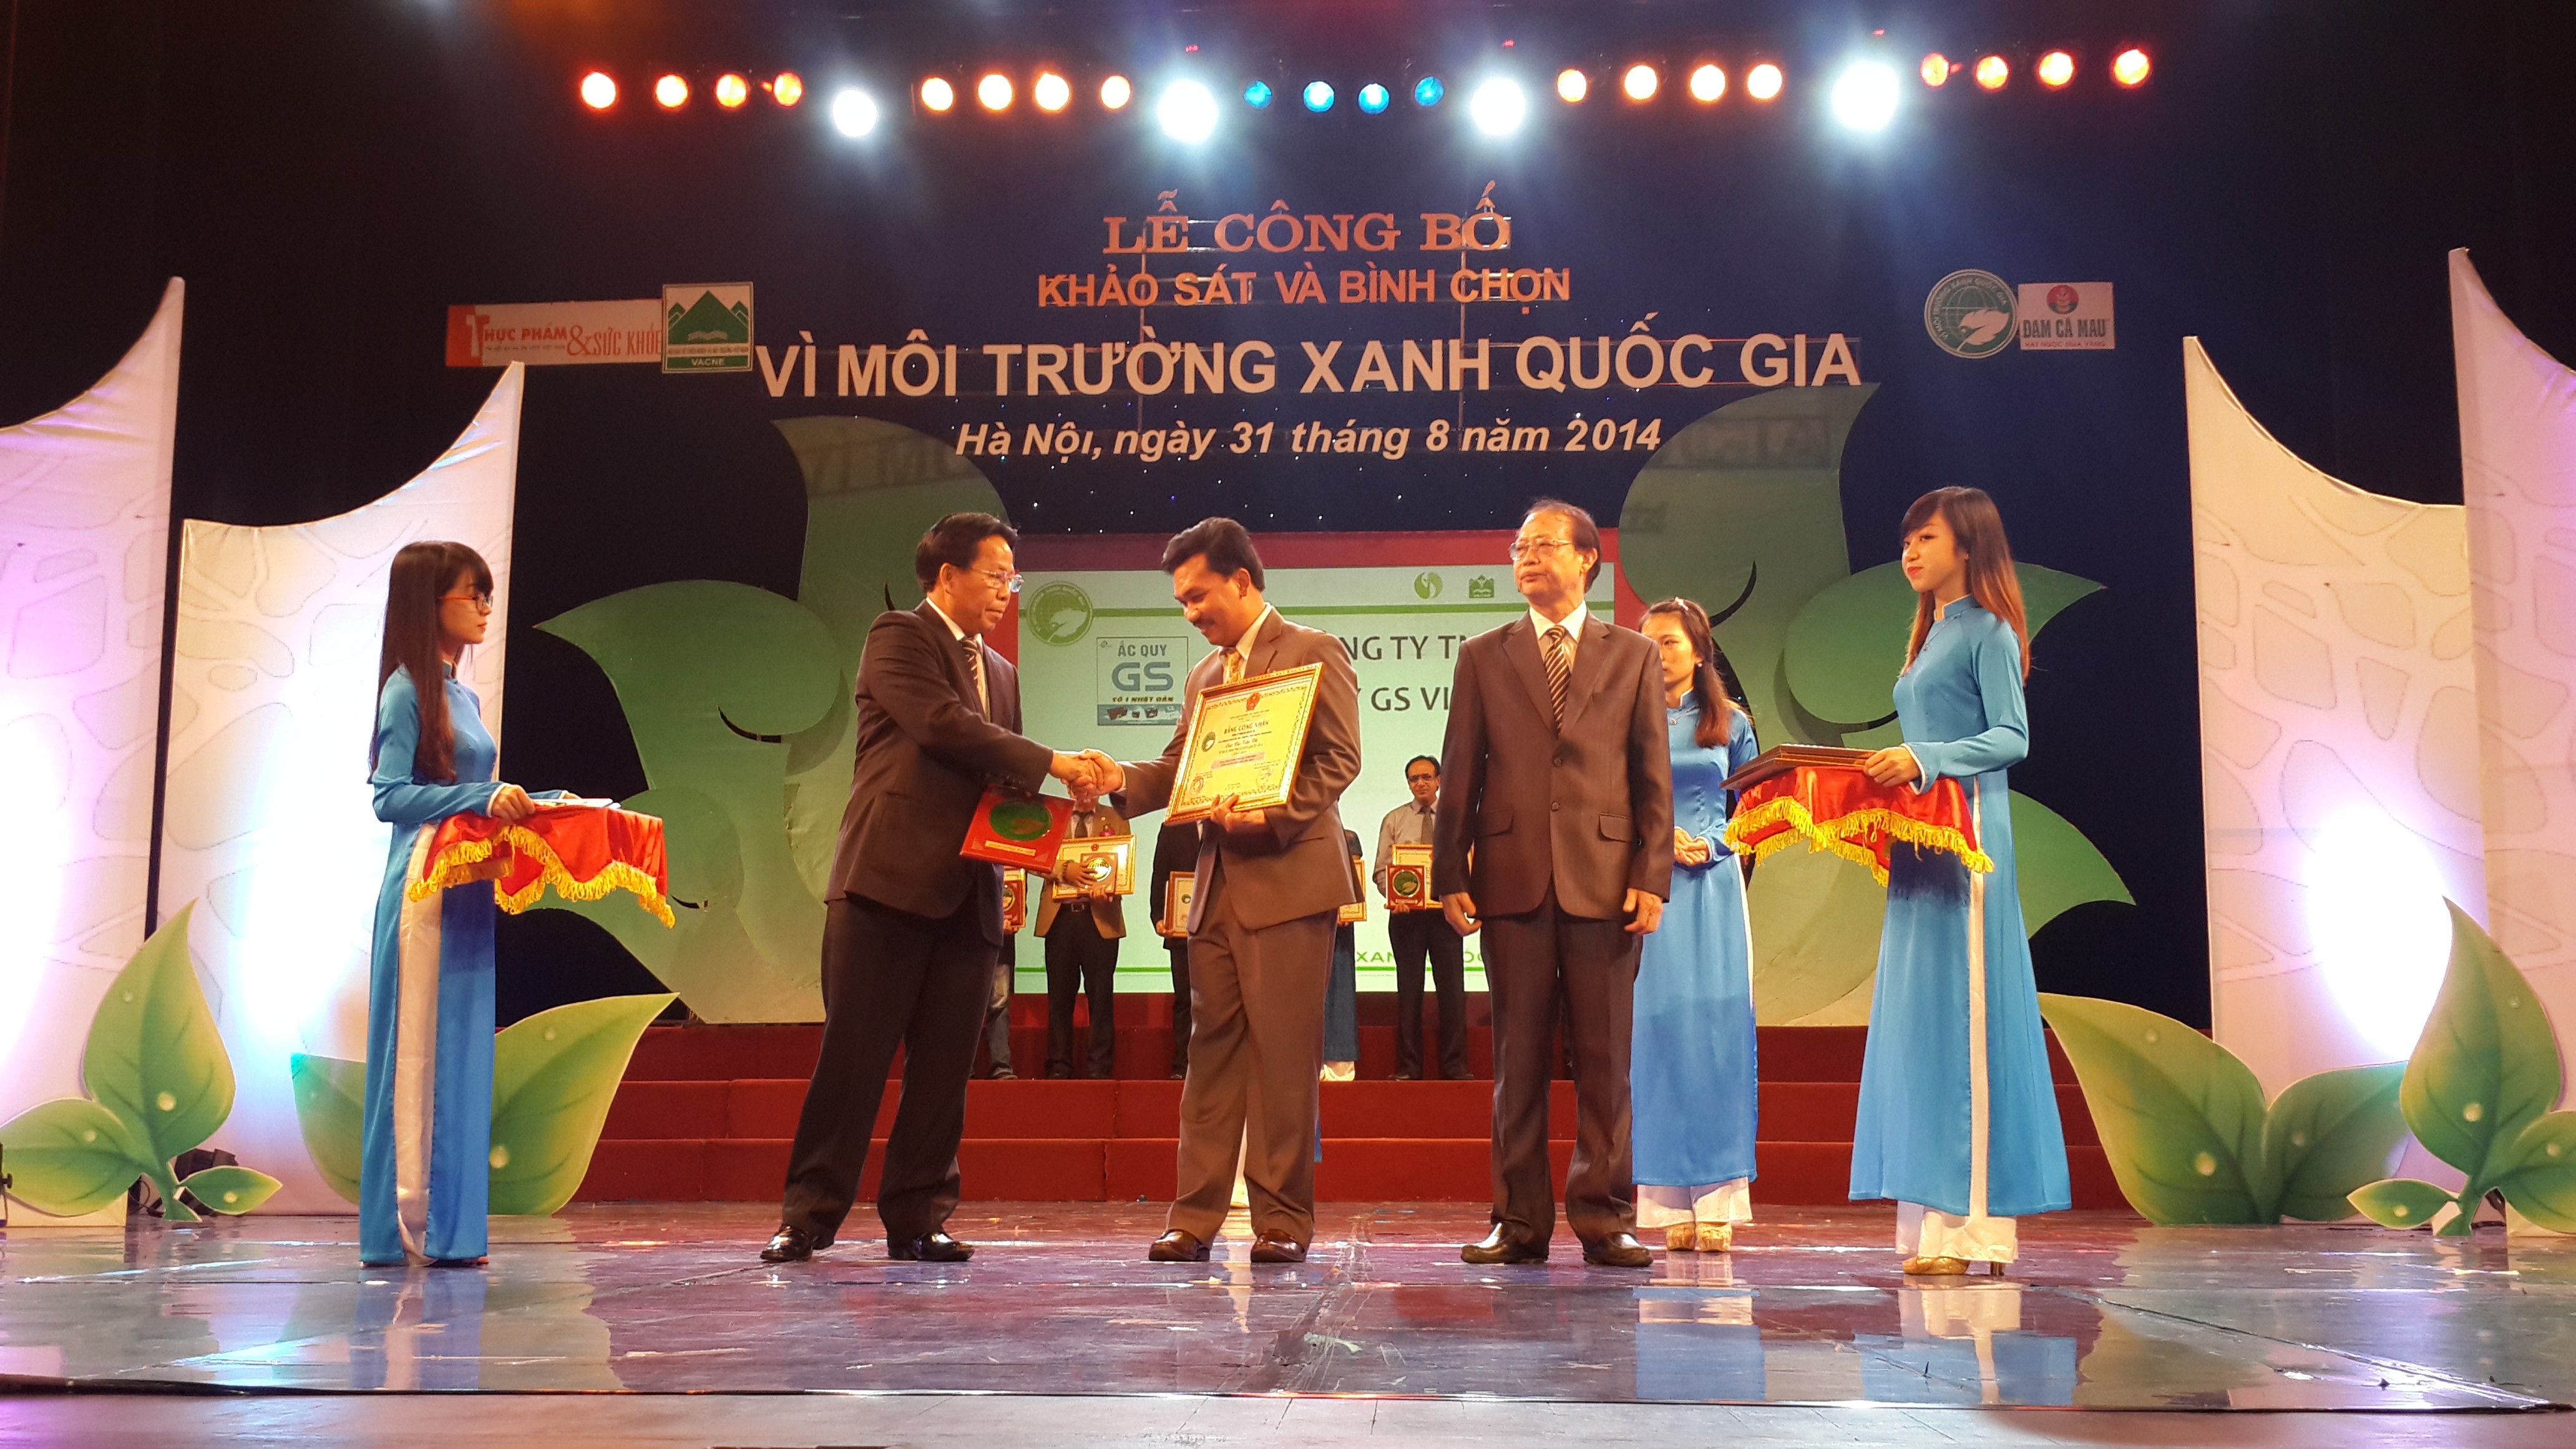 GSV RECEIVES “FOR GREEN ENVIRONMENT OF THE COUNTRY” PRIZES